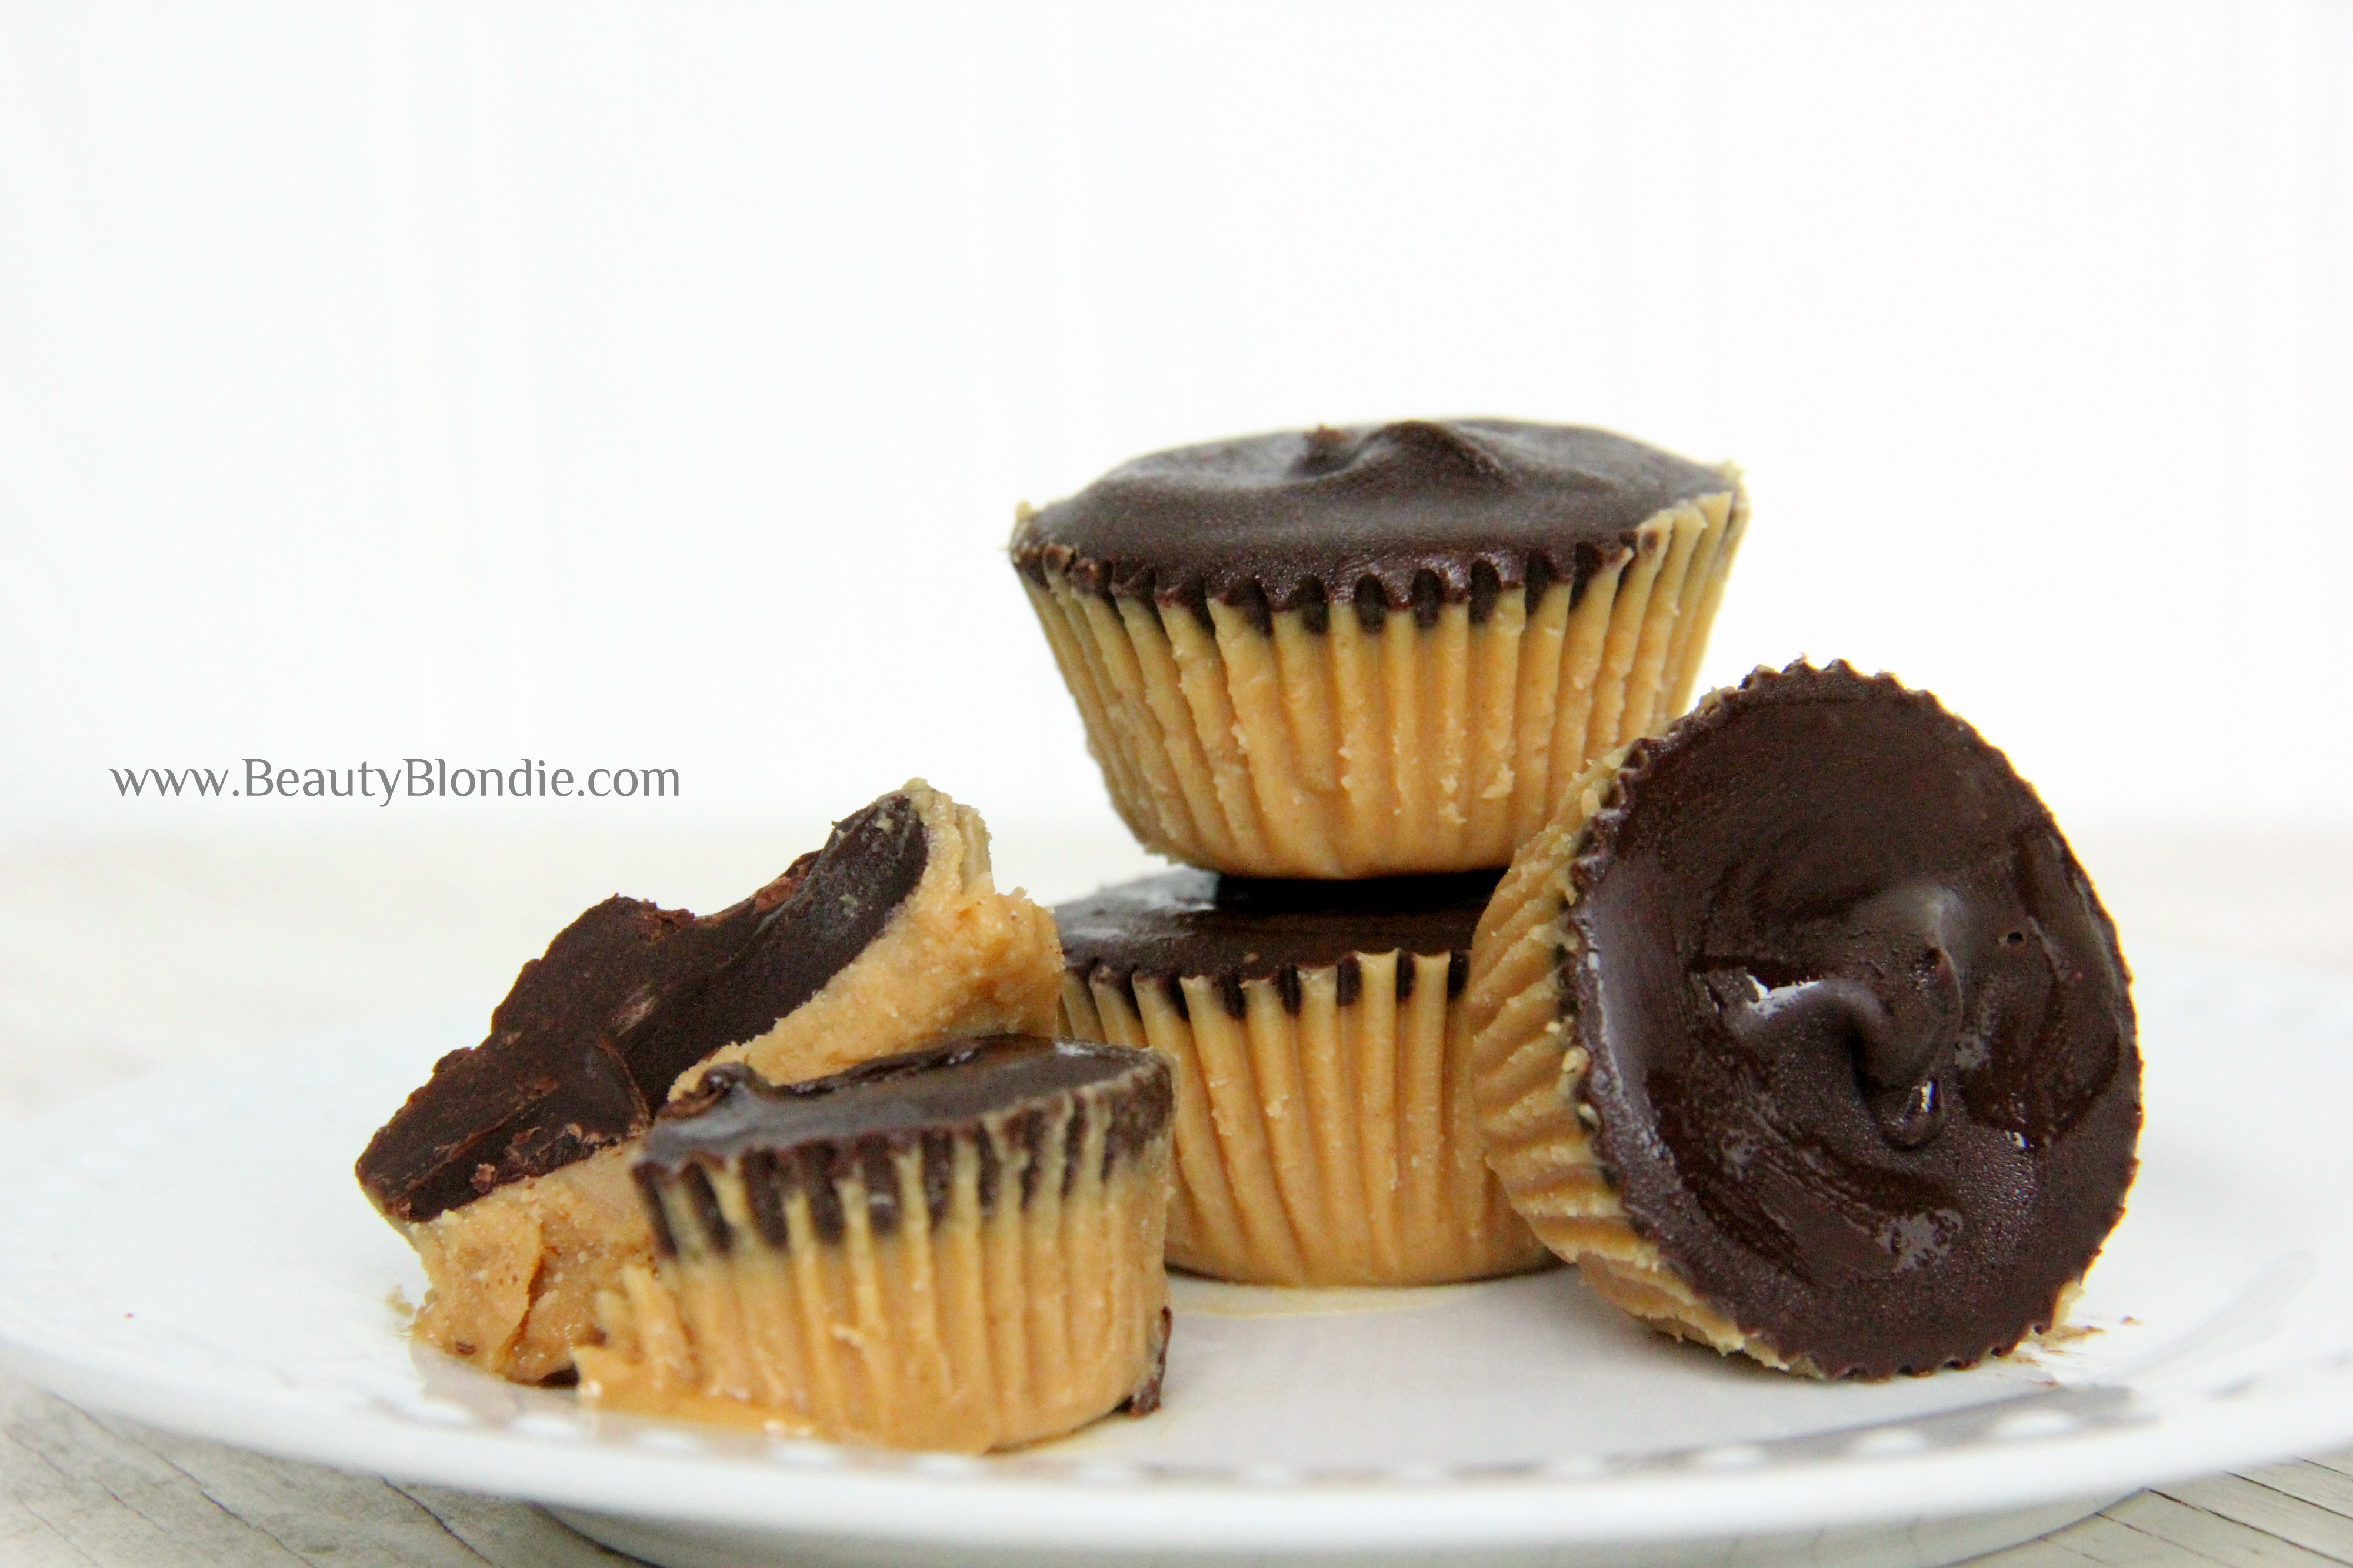 Deliciously Healthy Chocolate Peanut Butter Cups!